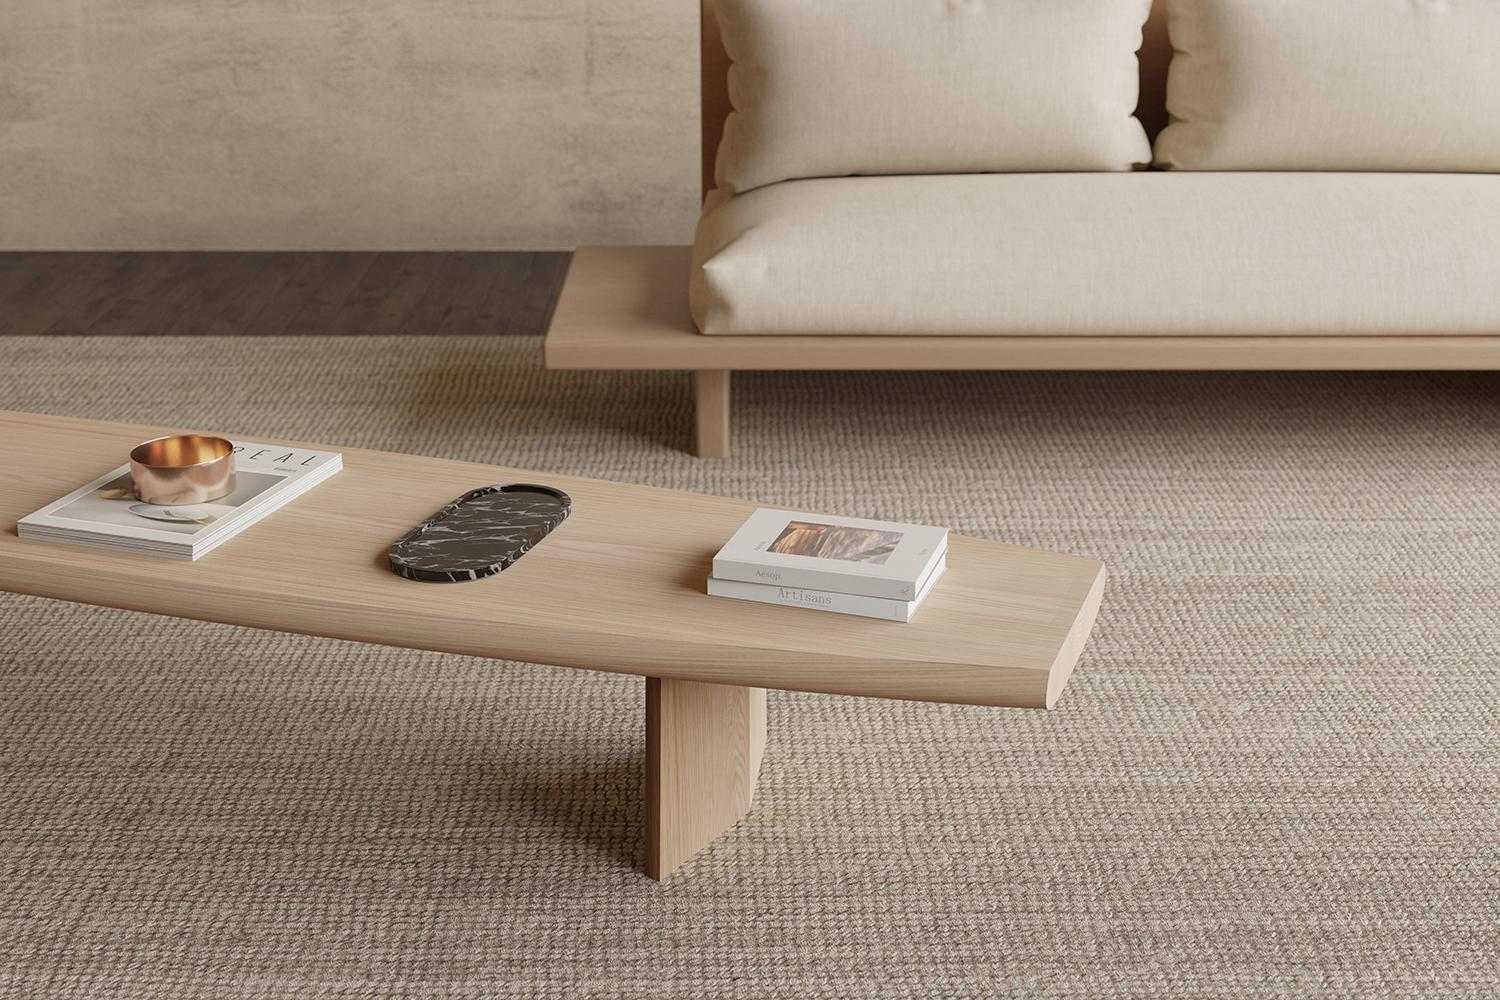 Peana Coffee Table, Bench in Natural Oak Solid Wood Finish by Joel Escalona

Peana, which in English translates to base or pedestal, is a series of tables and different surfaces inspired by the idea of creating worthy furniture pieces to place and